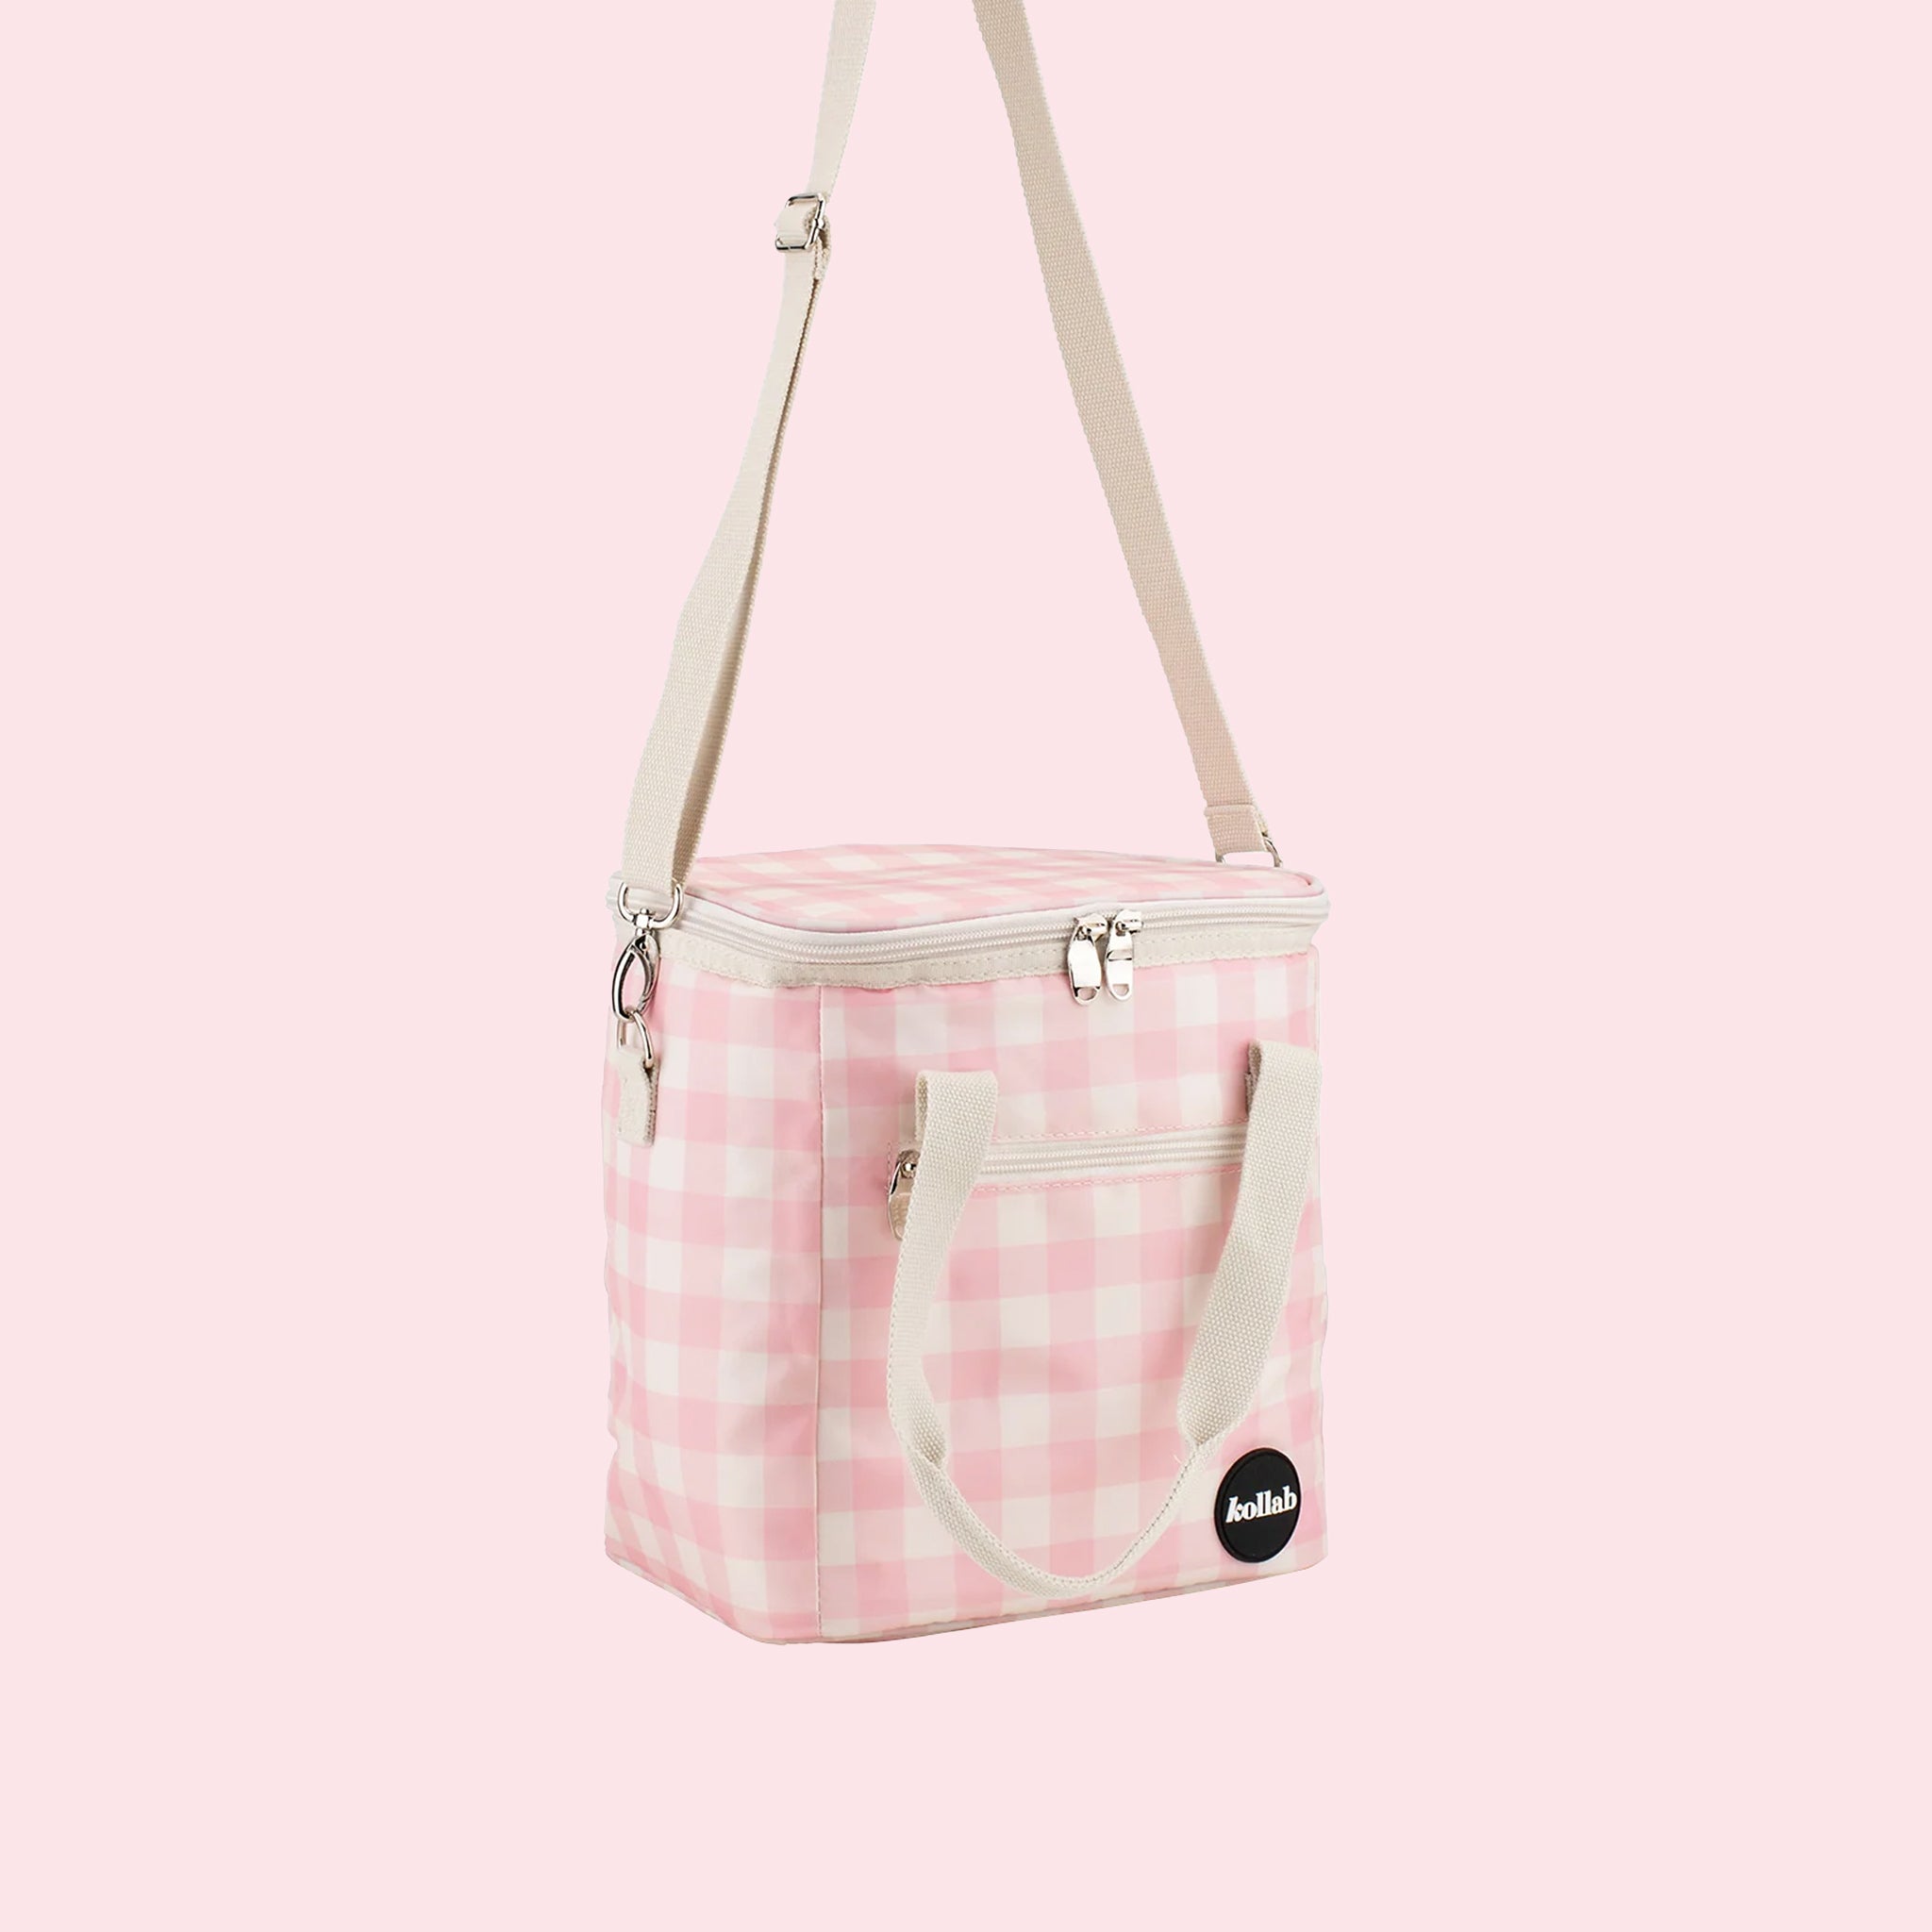 On a light pink background is a pink and white cooler bag with a long adjustable strap. 